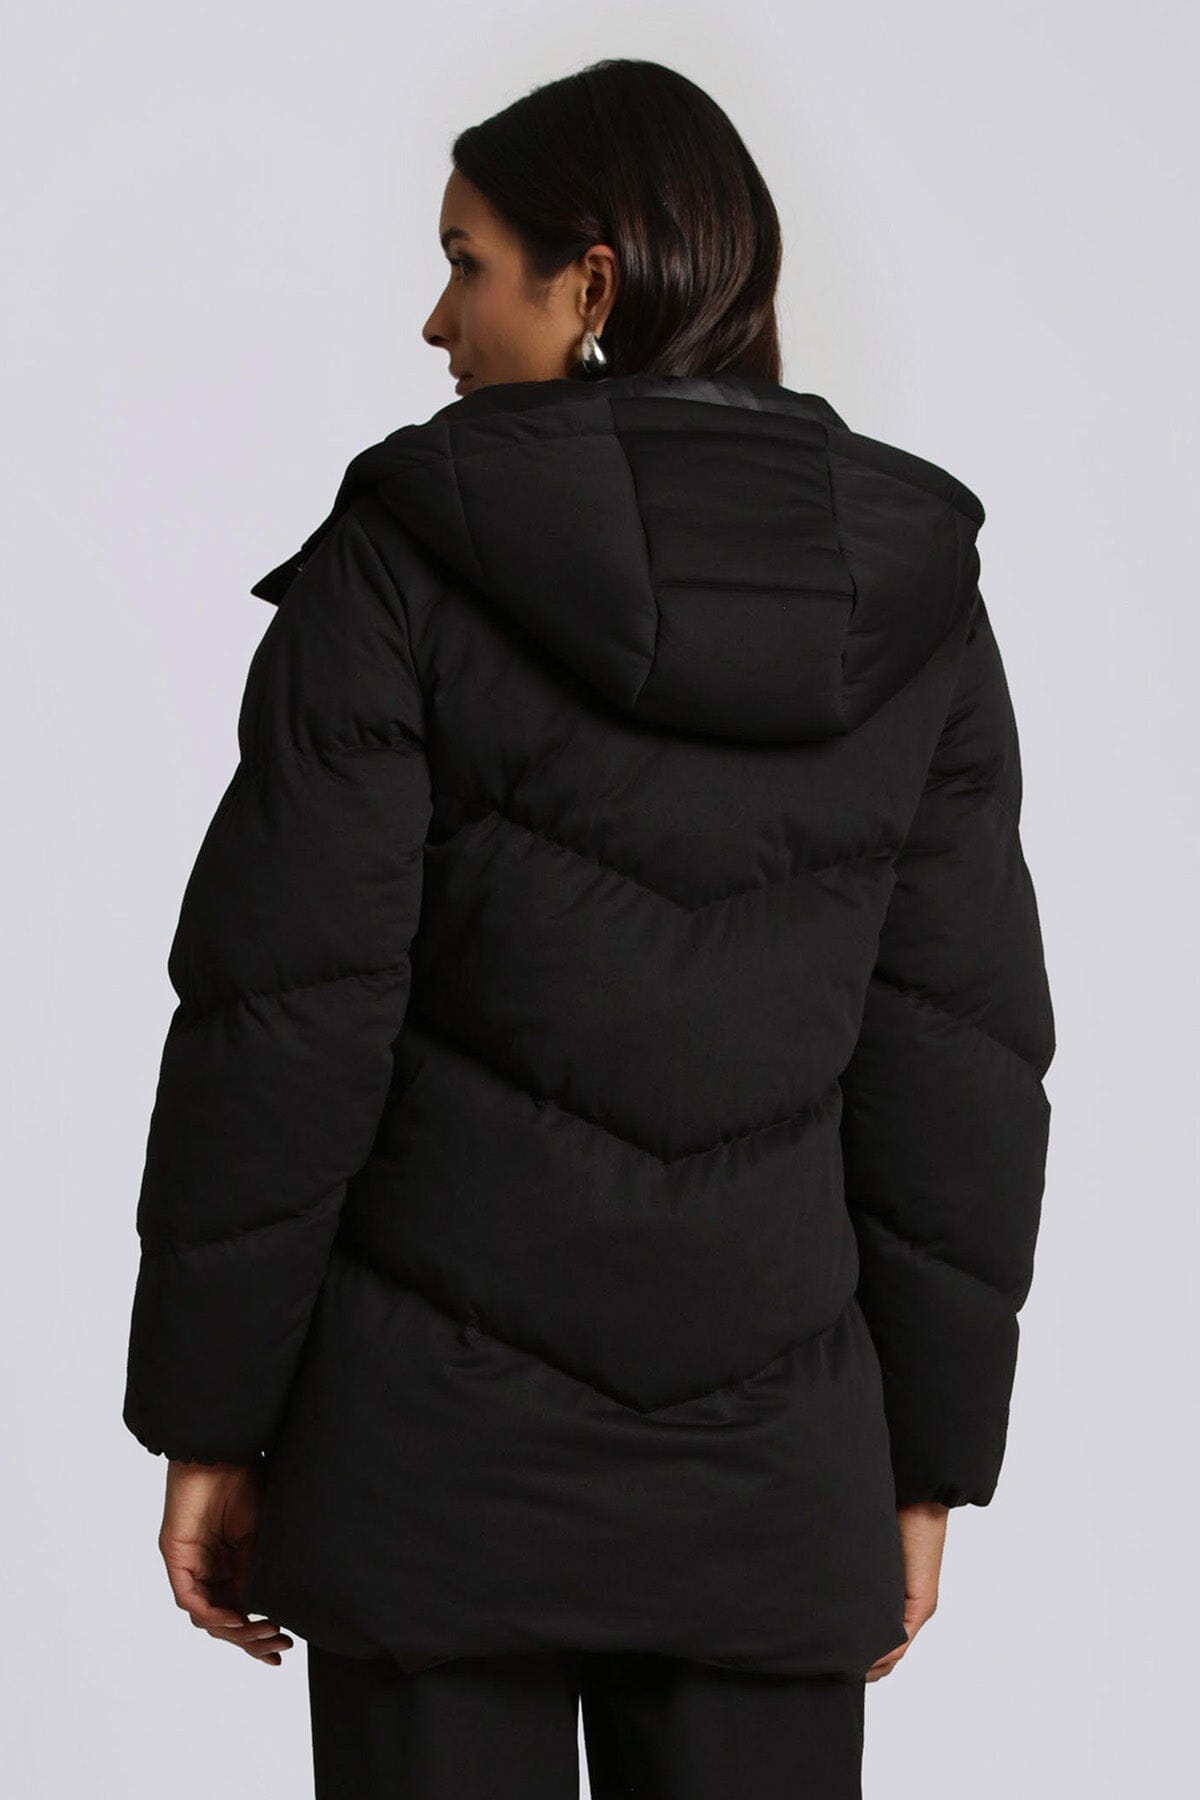 Black thermal puff cloud duvet hooded puffer coat jacket - figure flattering water resistant outerwear for women by Avec Les Filles